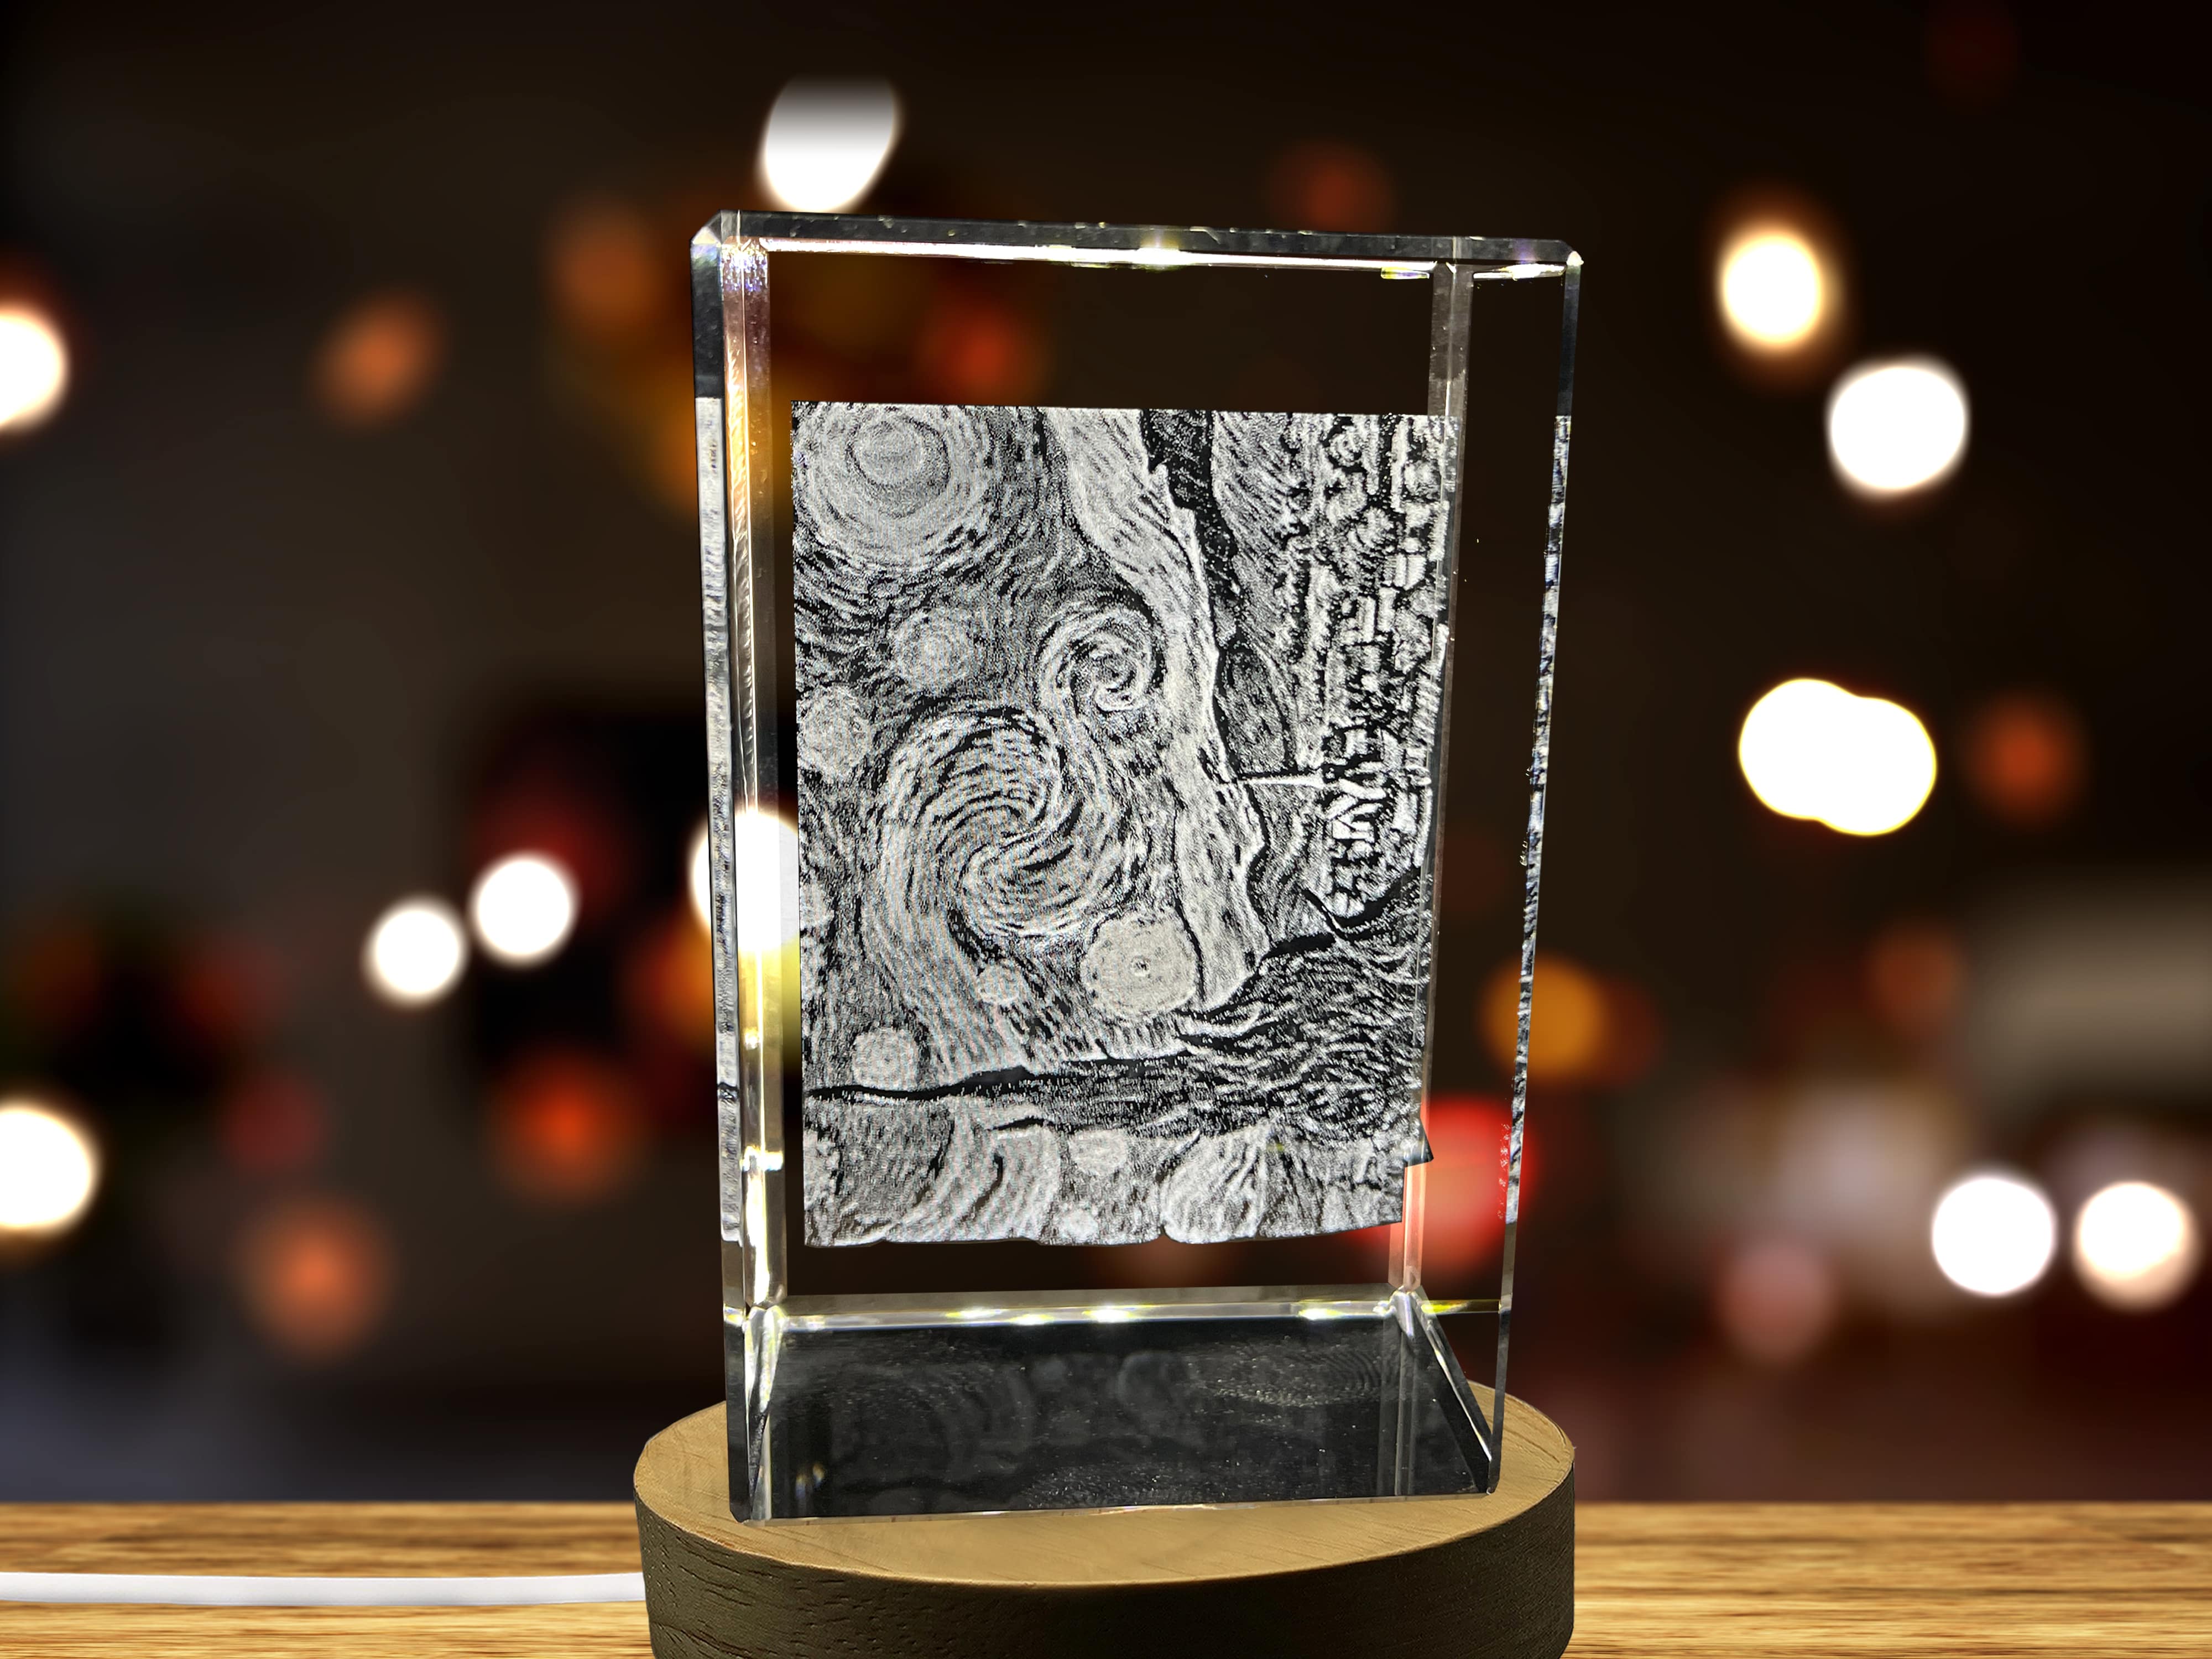 The Starry Night 3D Engraved Crystal Decor with LED Base Light A&B Crystal Collection